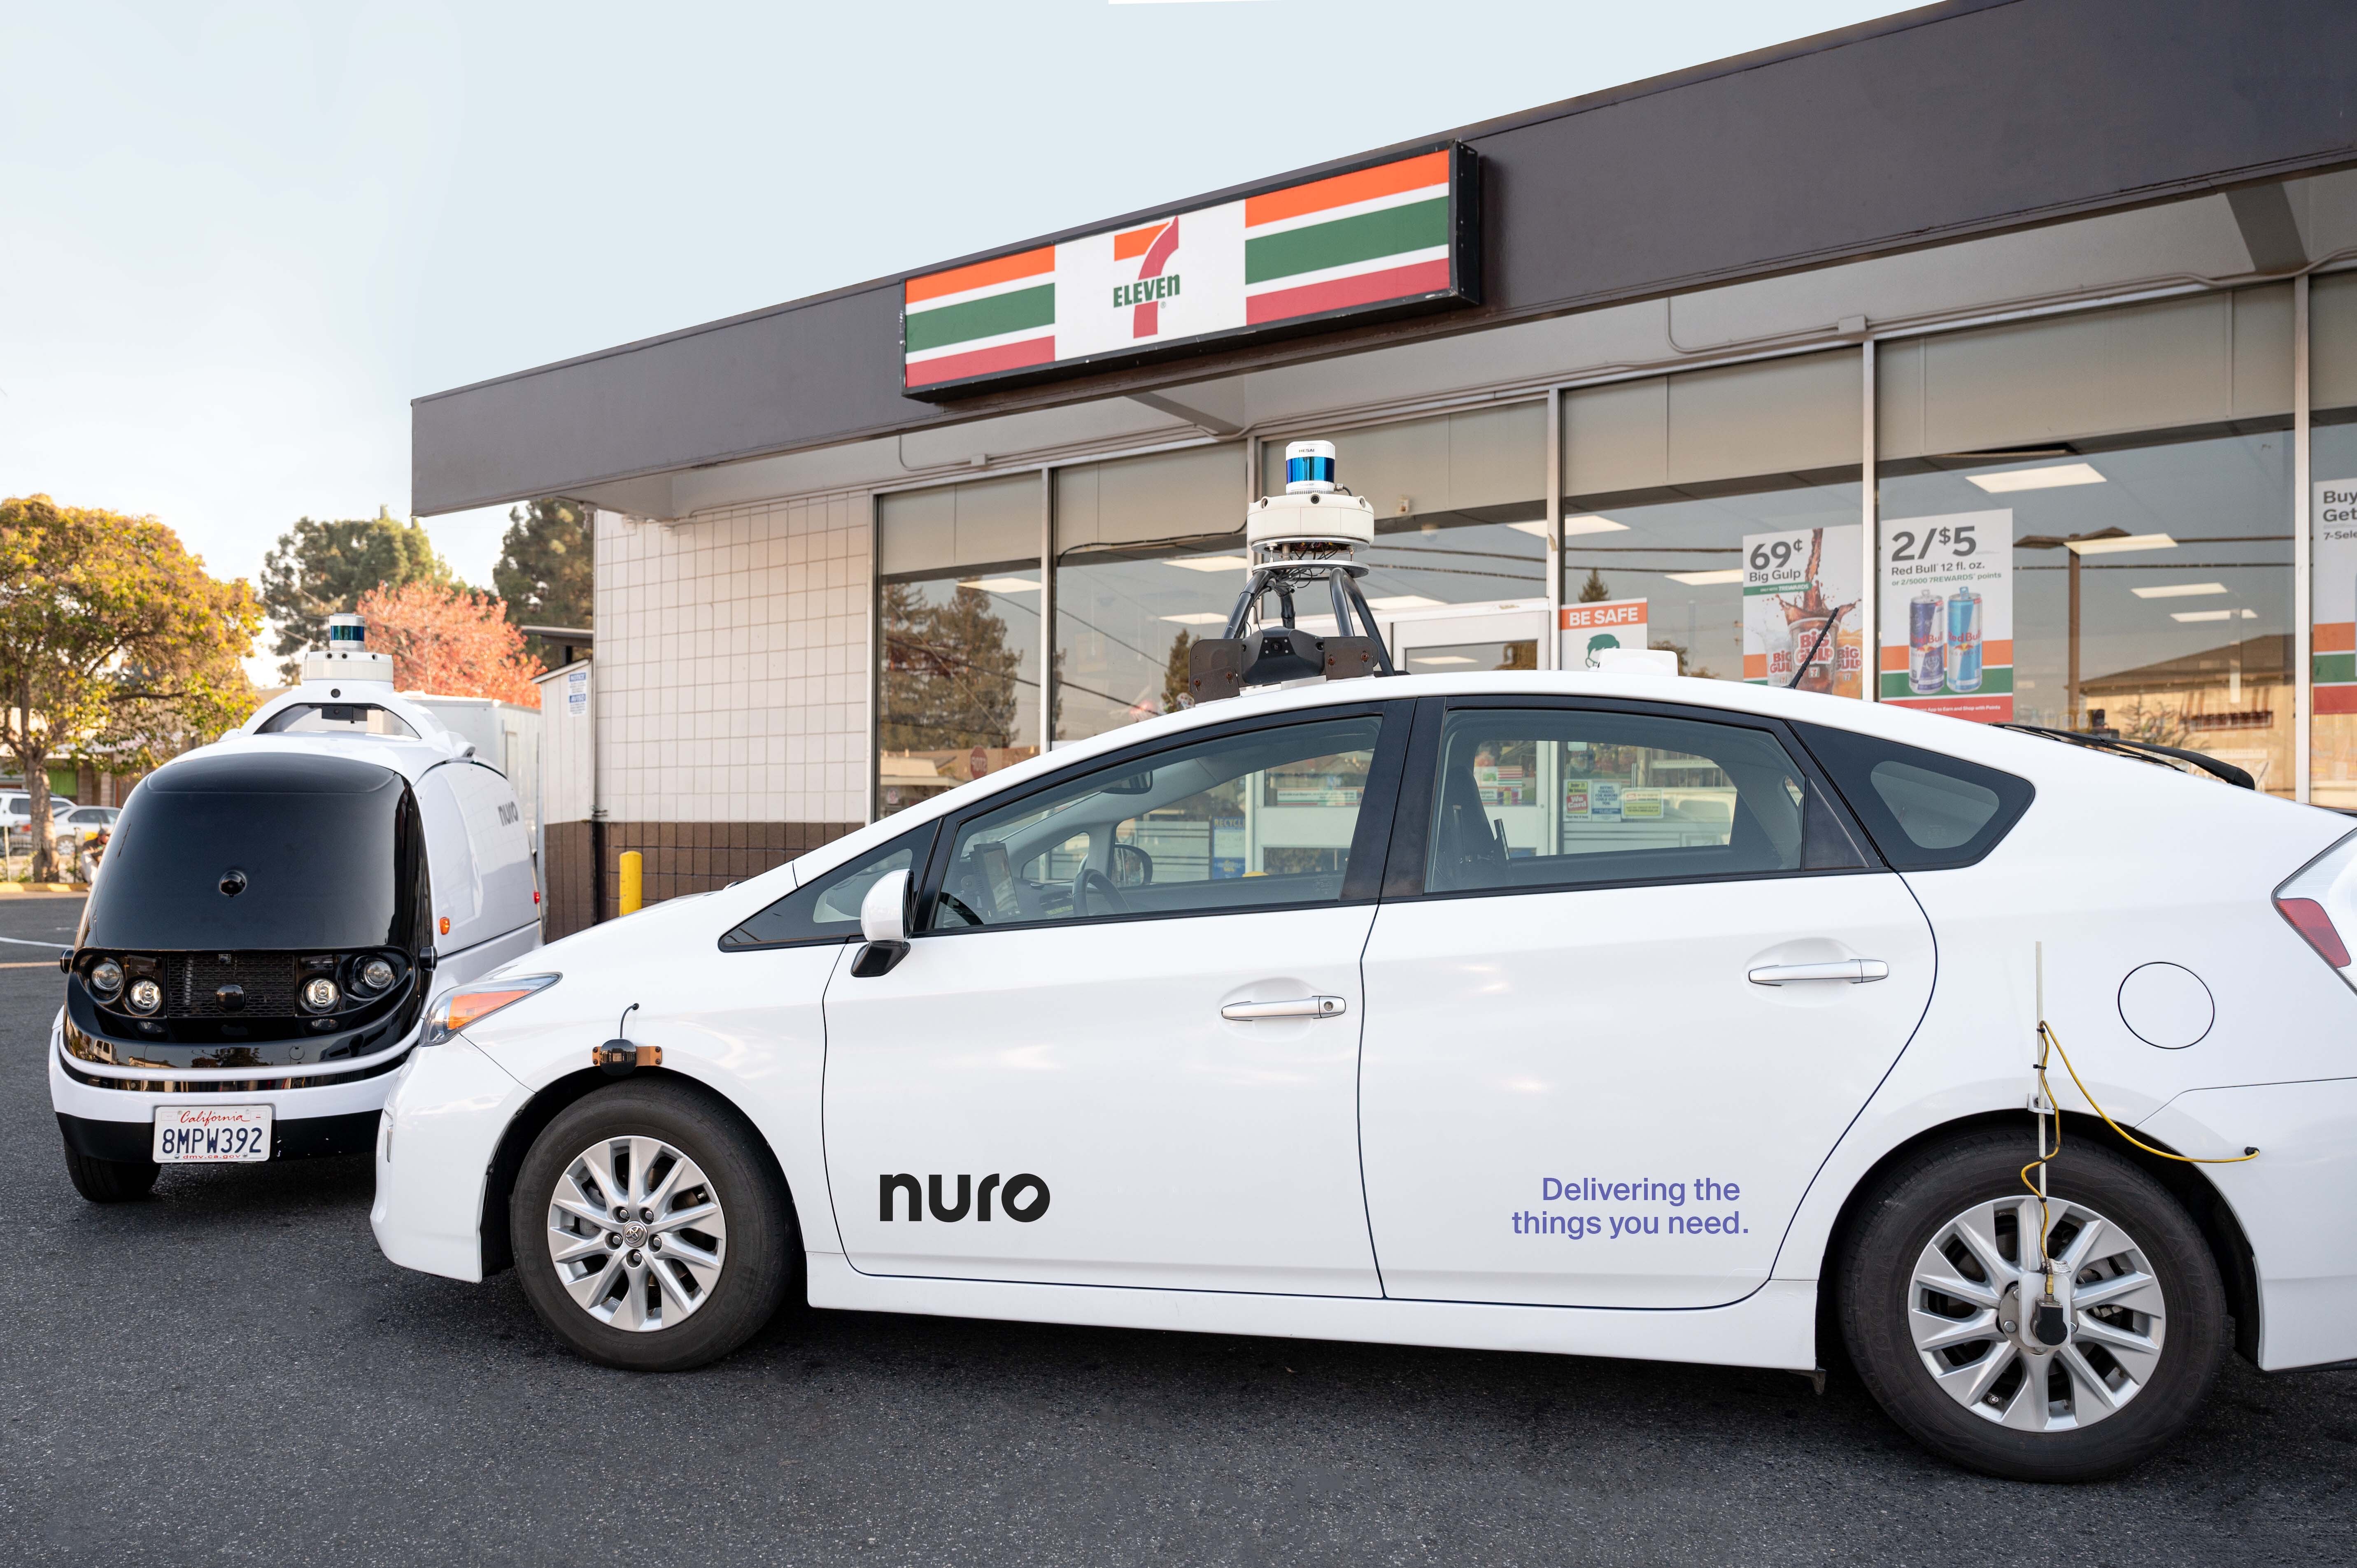 7-Eleven and Nuro Team Up to Launch First Commercial Autonomous Delivery Service in California